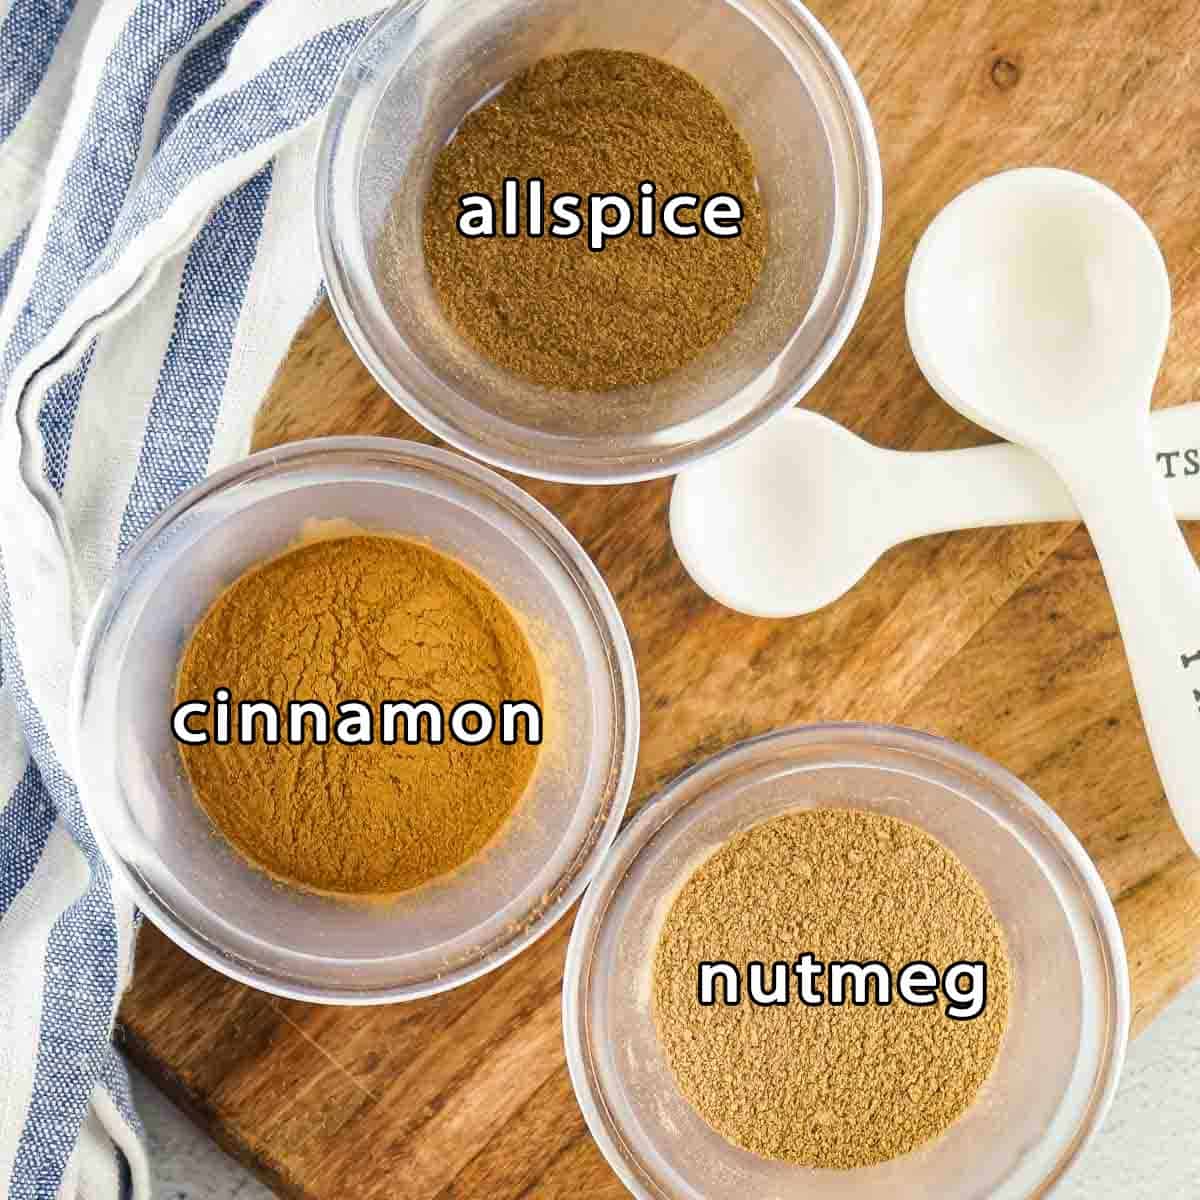 Overhead shot of ingredients - allspice, cinnamon, and nutmeg with measuring spoons on the side.